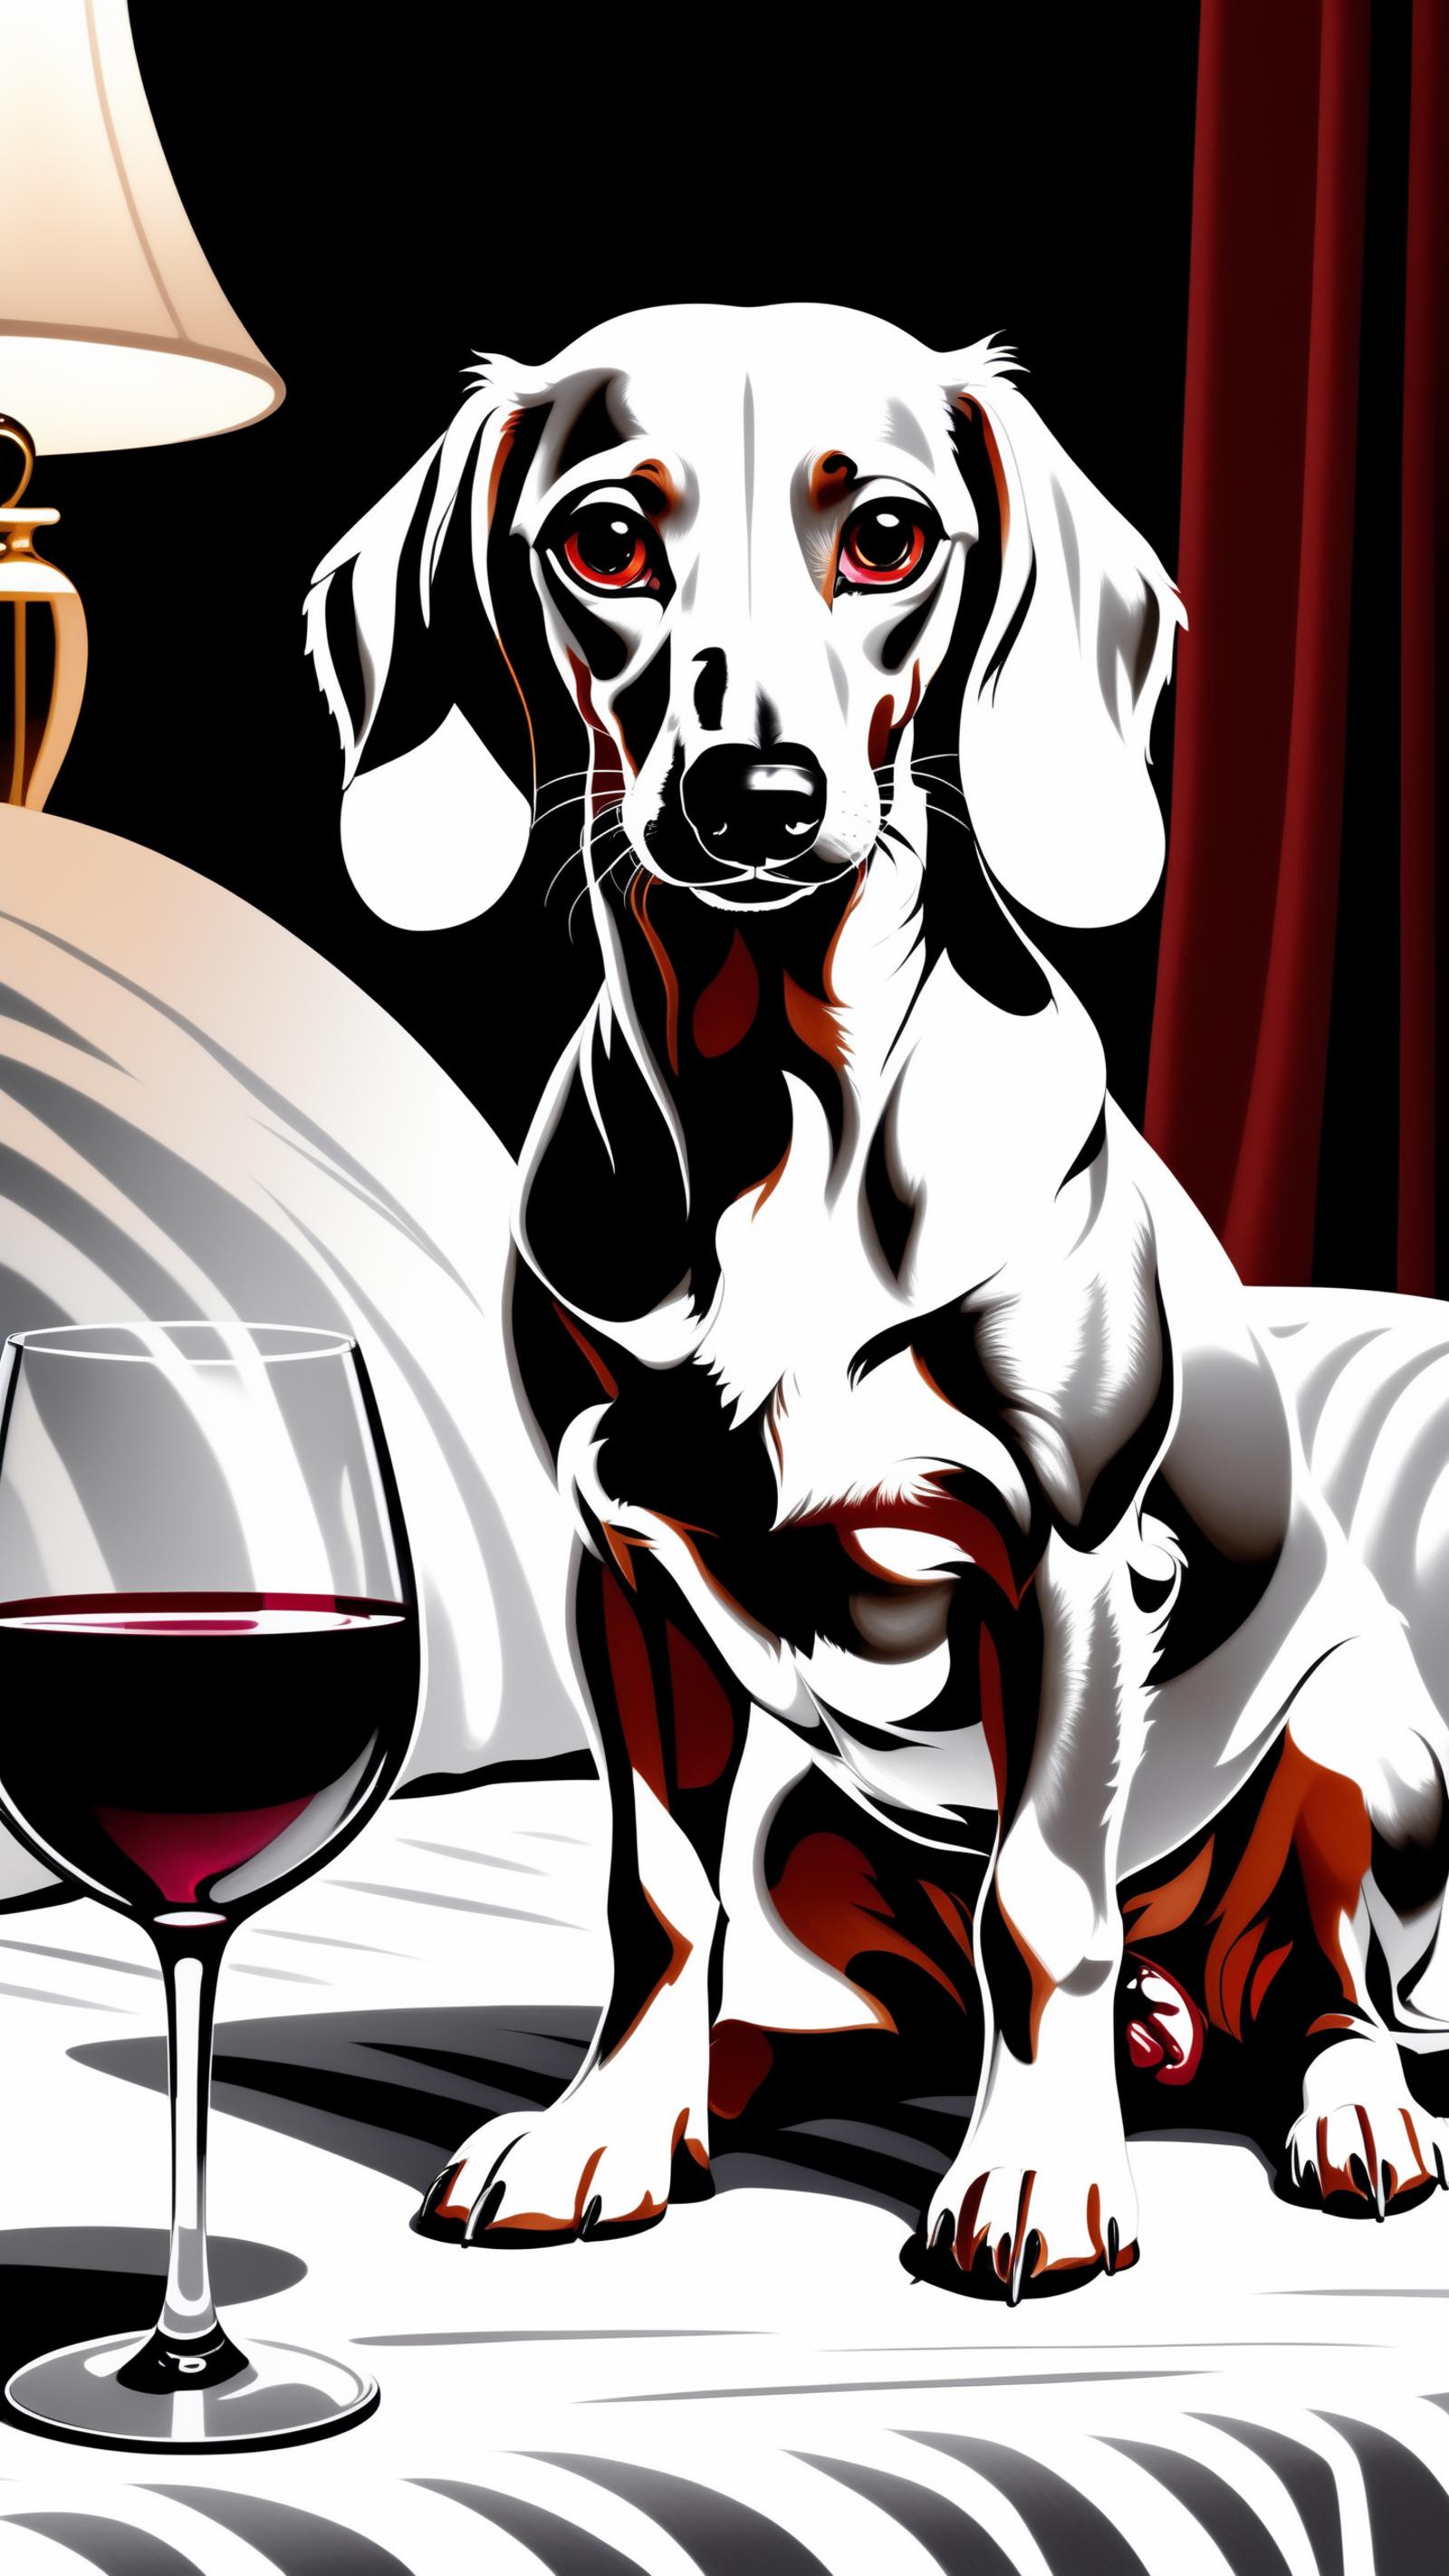 A black and white dog sitting next to a glass of red wine.